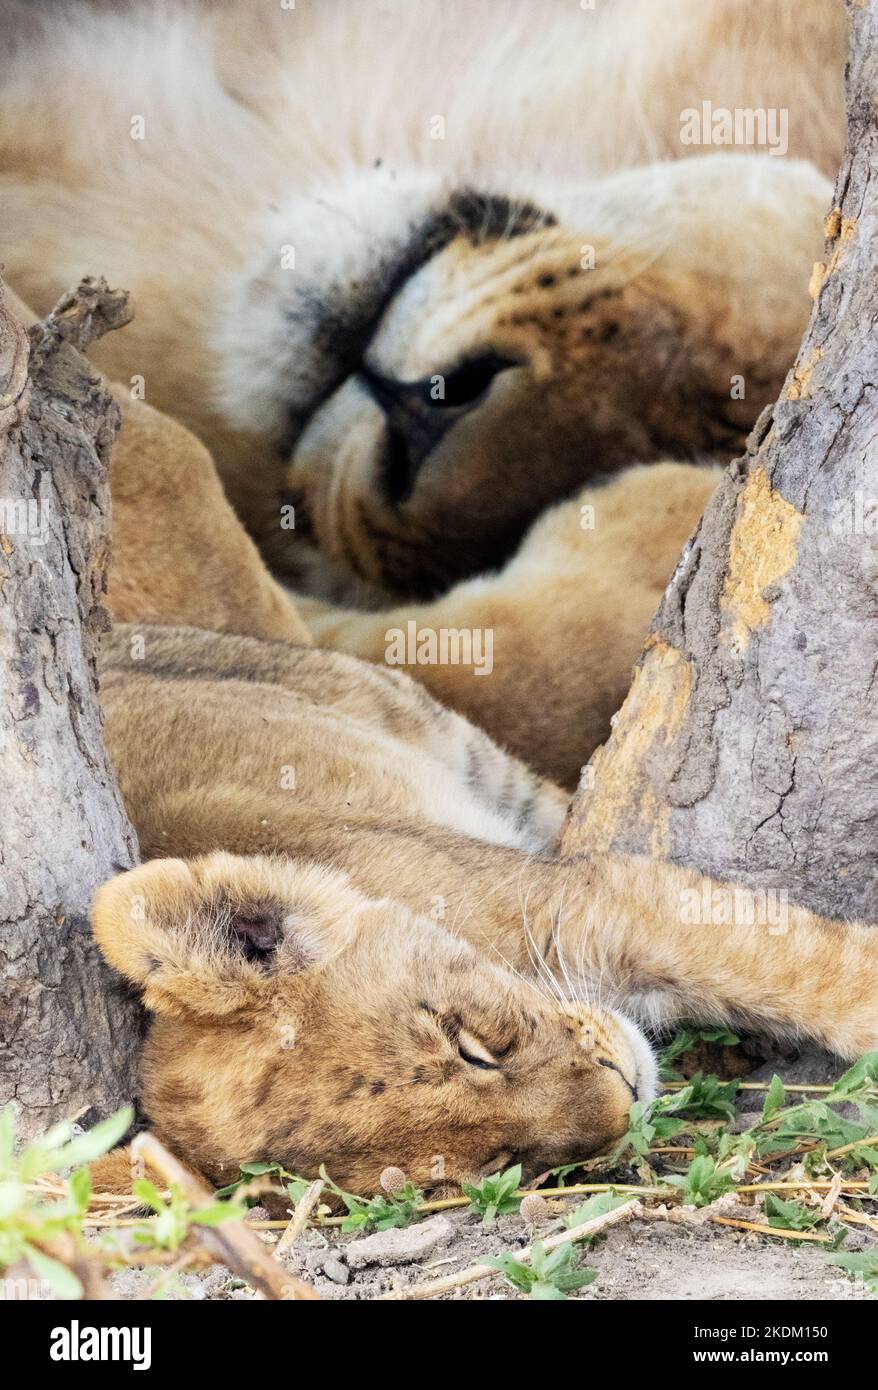 Lion cub, mother; - Lion cub sleeping next to its mother, Moremi Game Reserve, Okavango Delta, Botswana Africa. African animal. Stock Photo